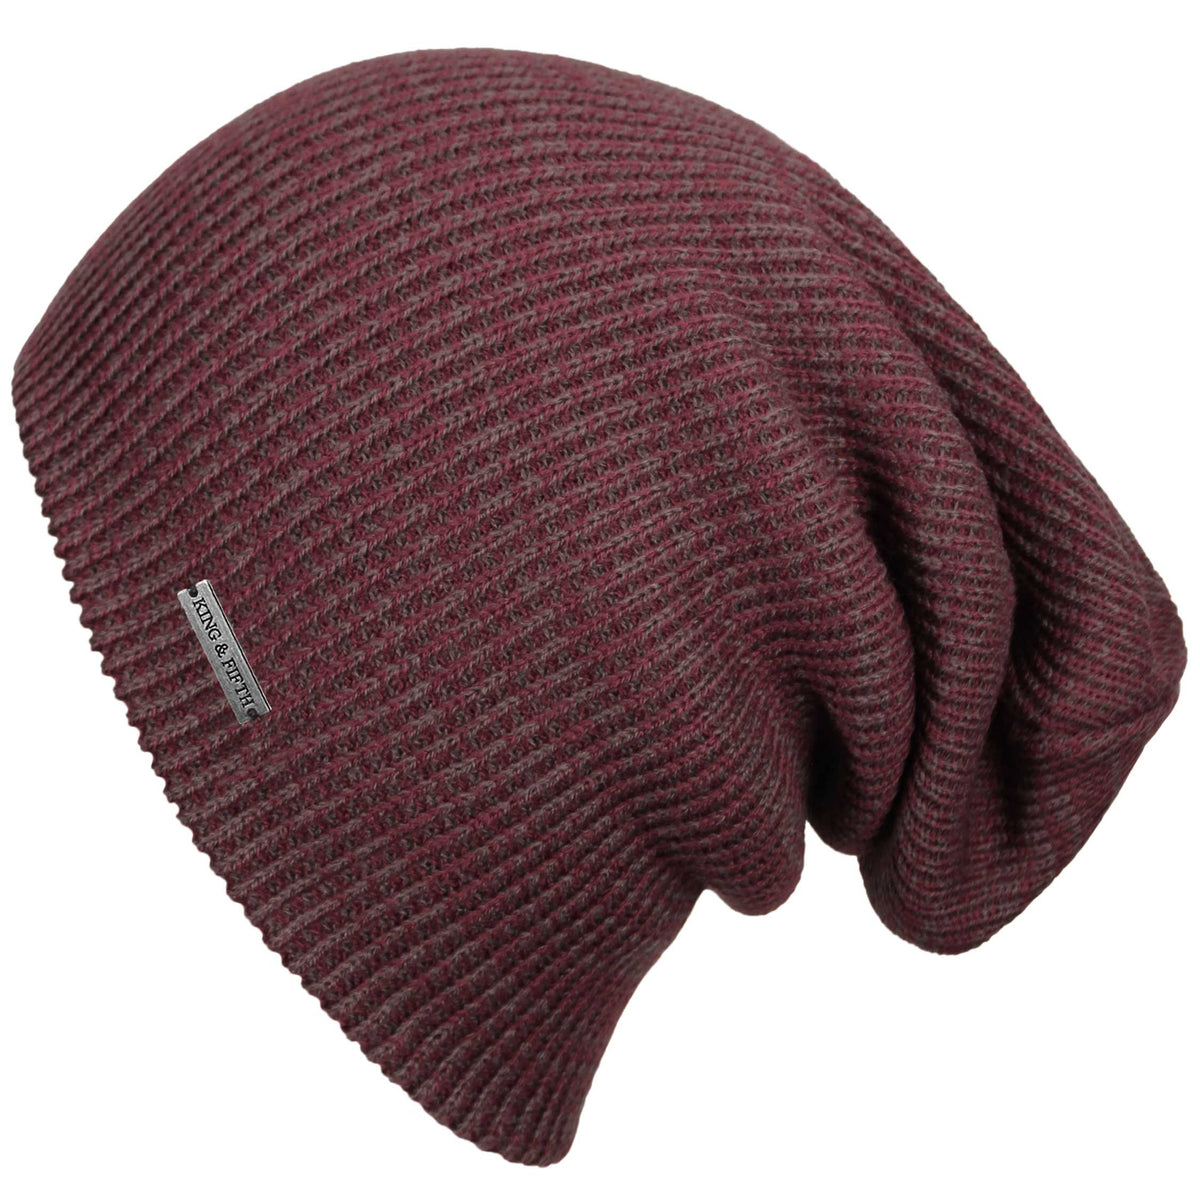 K&F Mens Slouchy Beanie - The Forte XL - Extra Large Mens Beanie Hat - King  and Fifth Supply